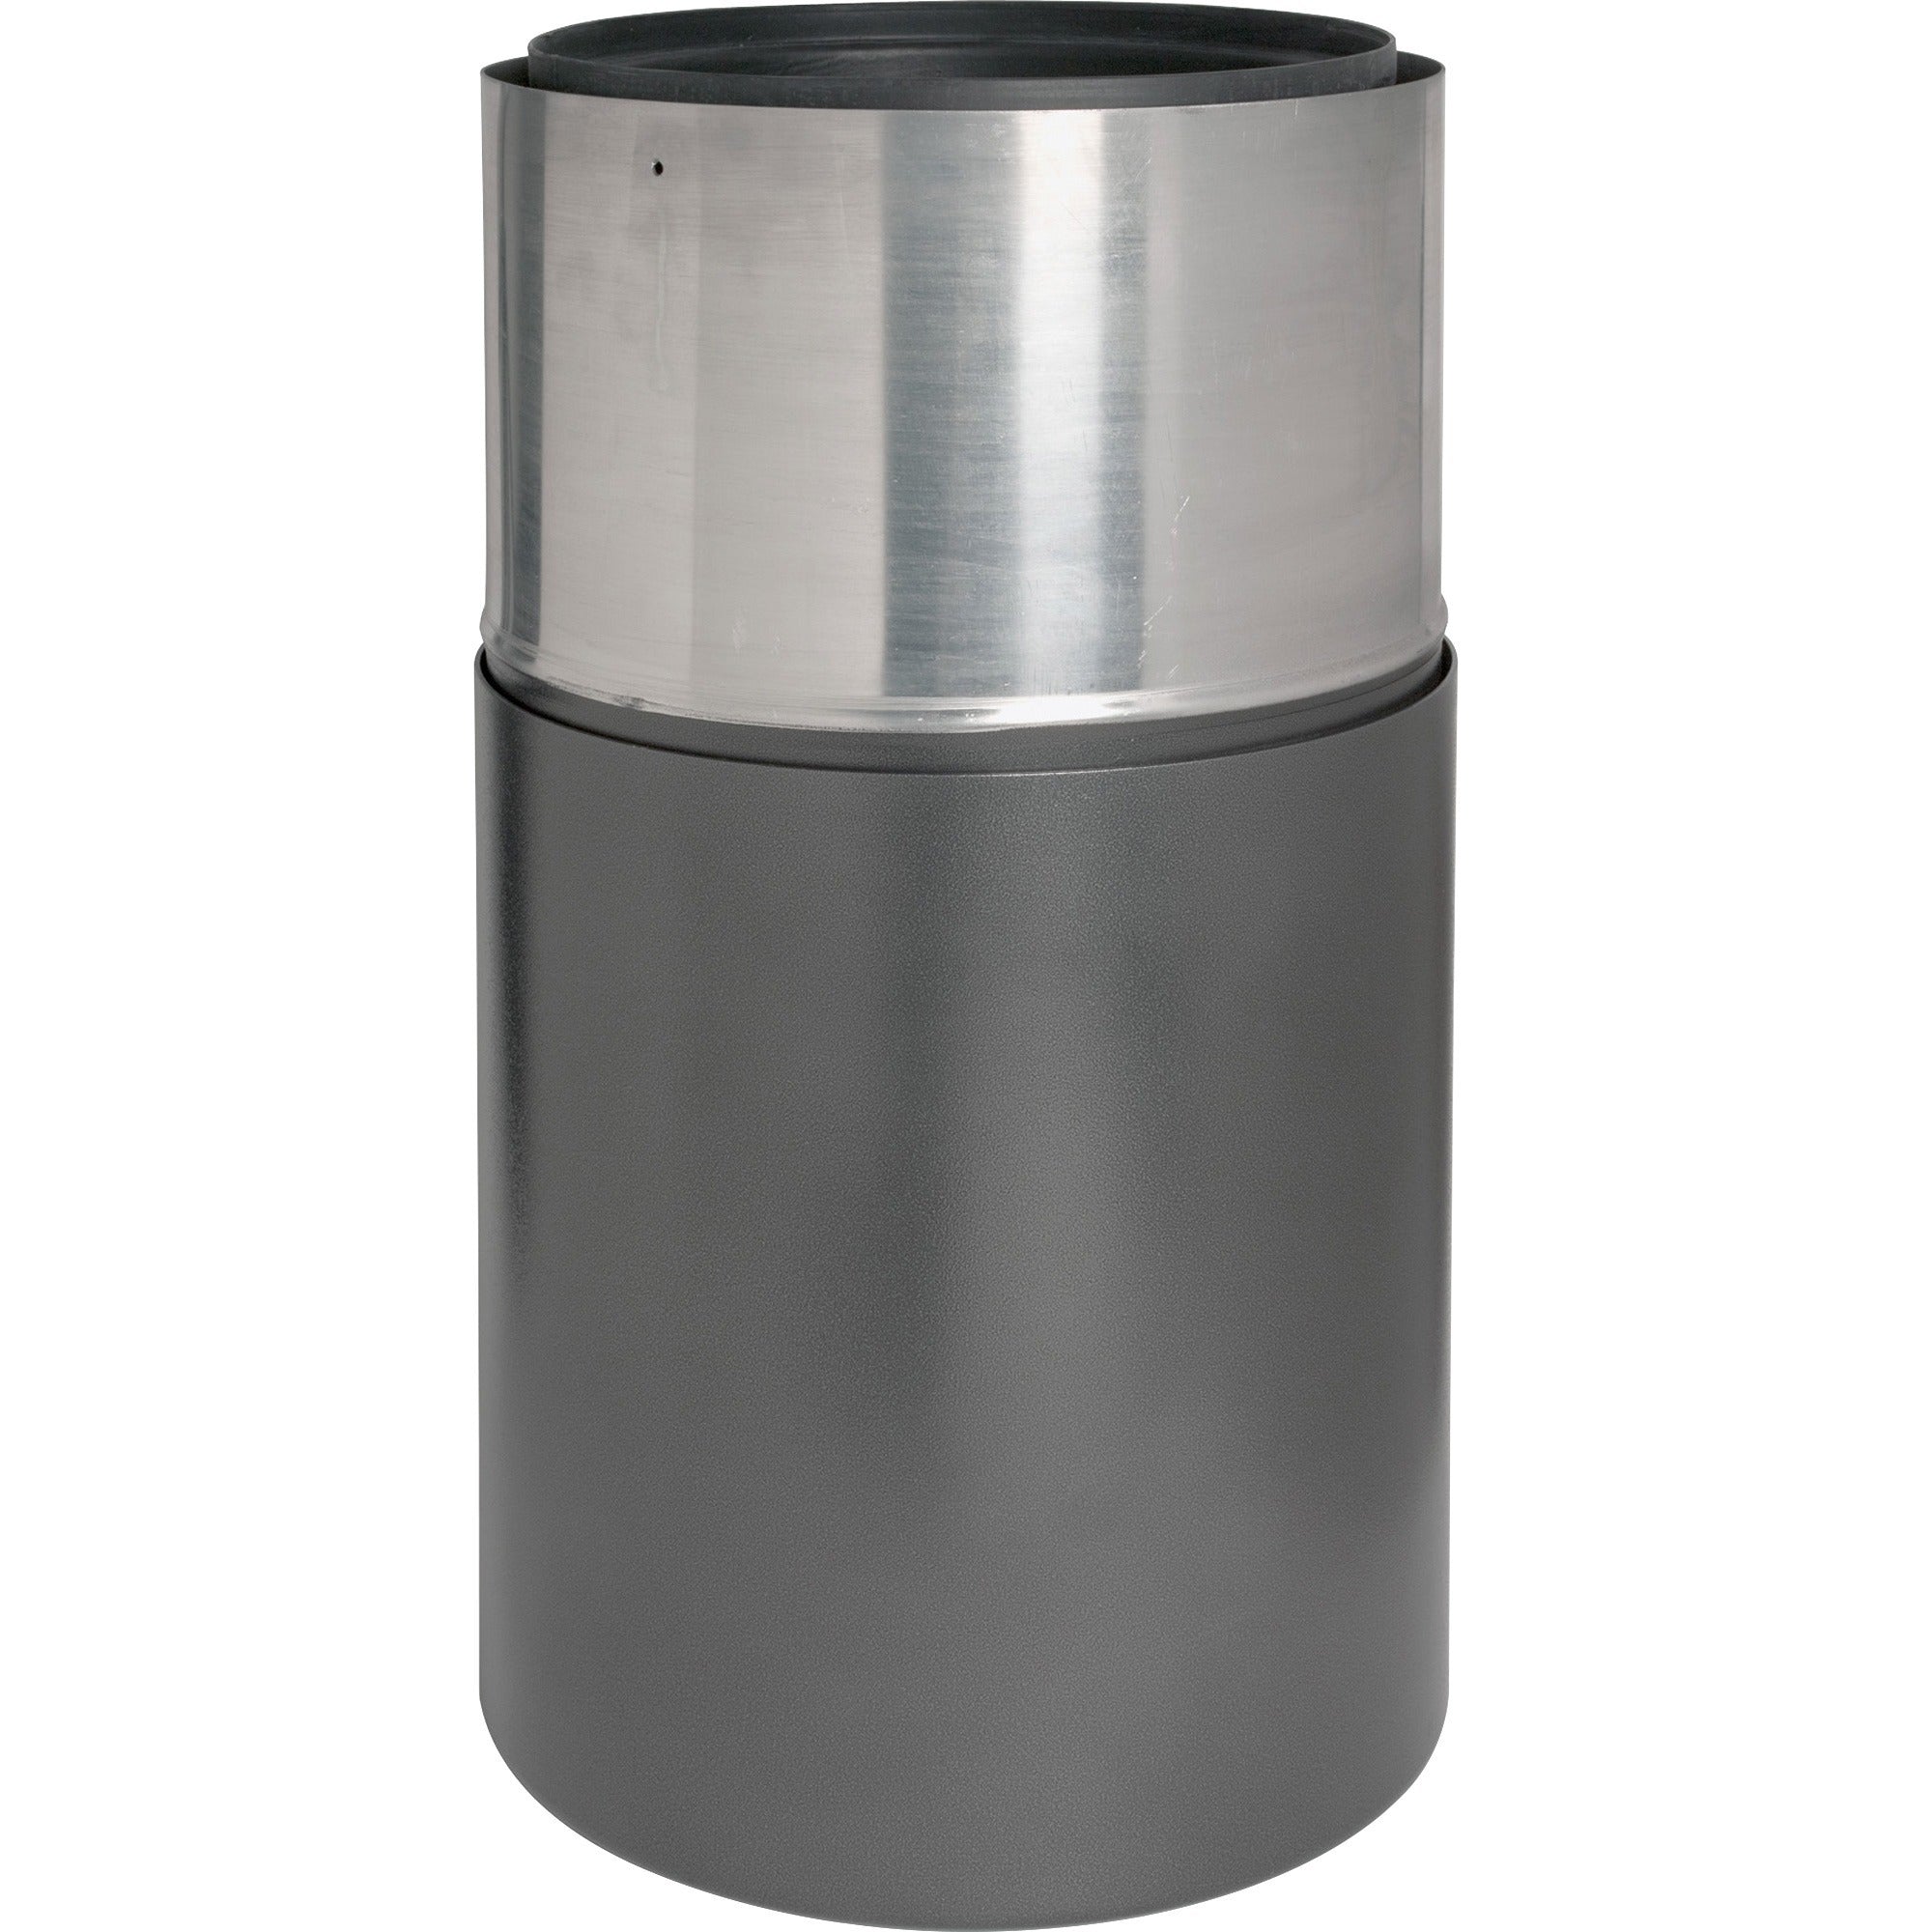 Genuine Joe Classic Cylinder Gray Waste Receptacle - 35 gal Capacity - Weather Resistant, Fire Proof, Leak Proof - 34" Height x 18" Diameter - Aluminum - Charcoal - 1 Each - 